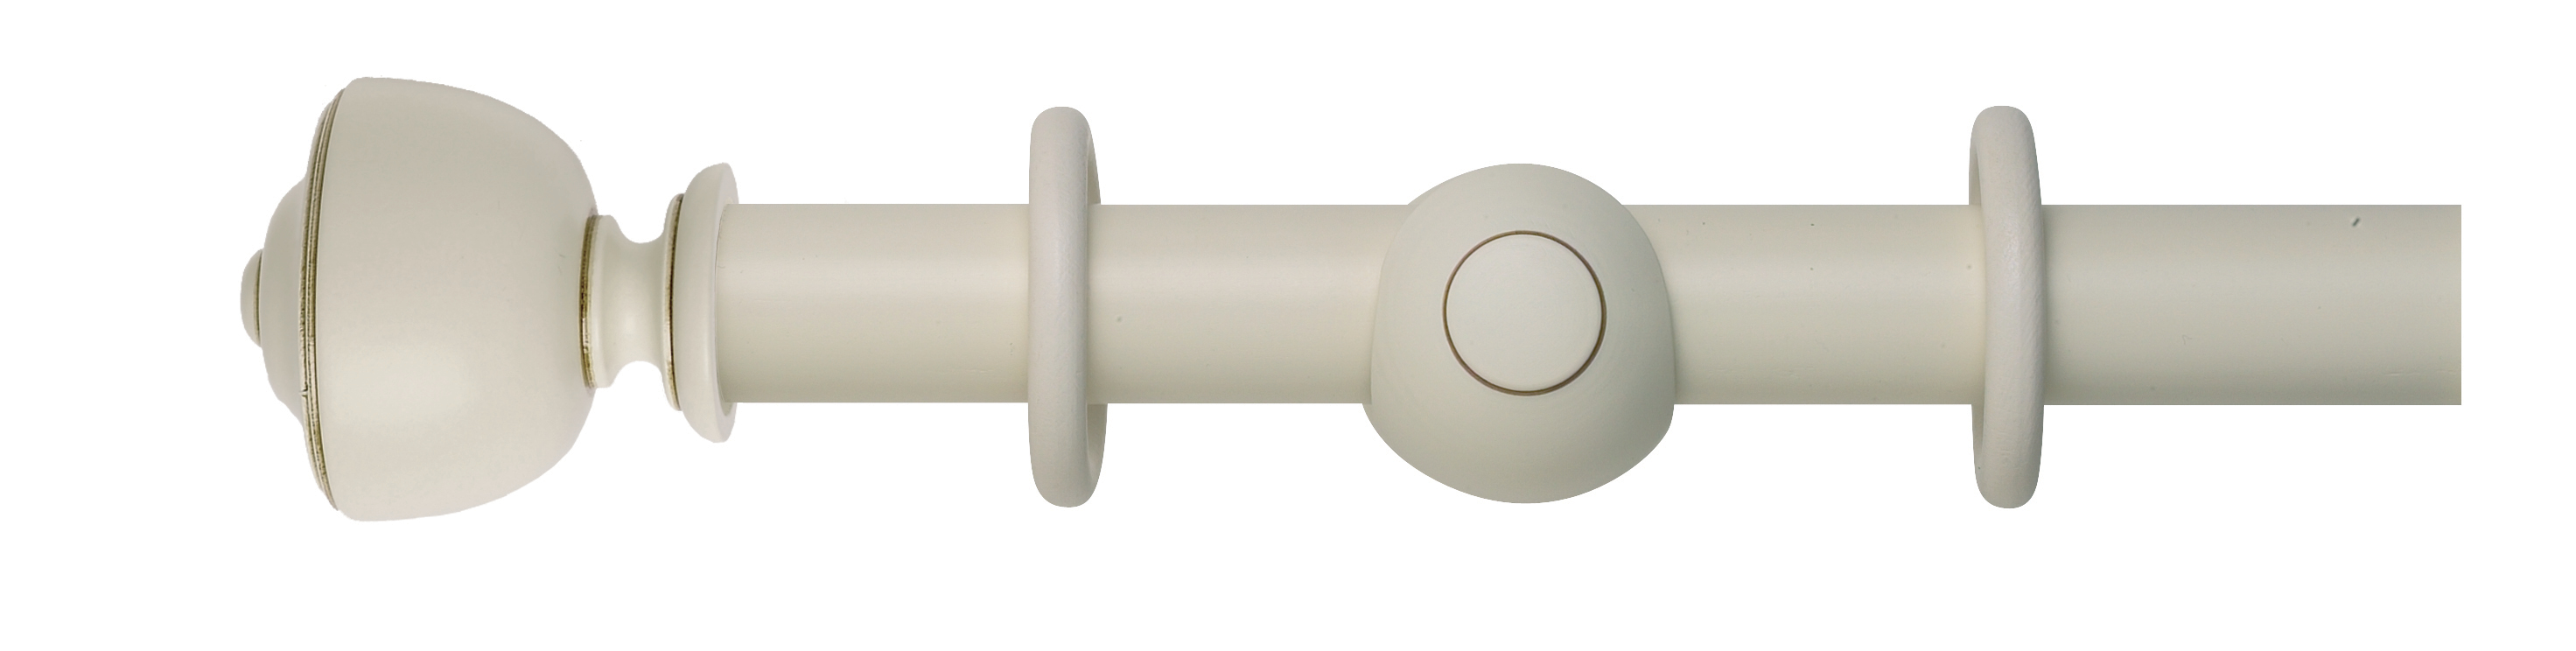 Museum 35mm Pole Set in Antique White with Parham Finial